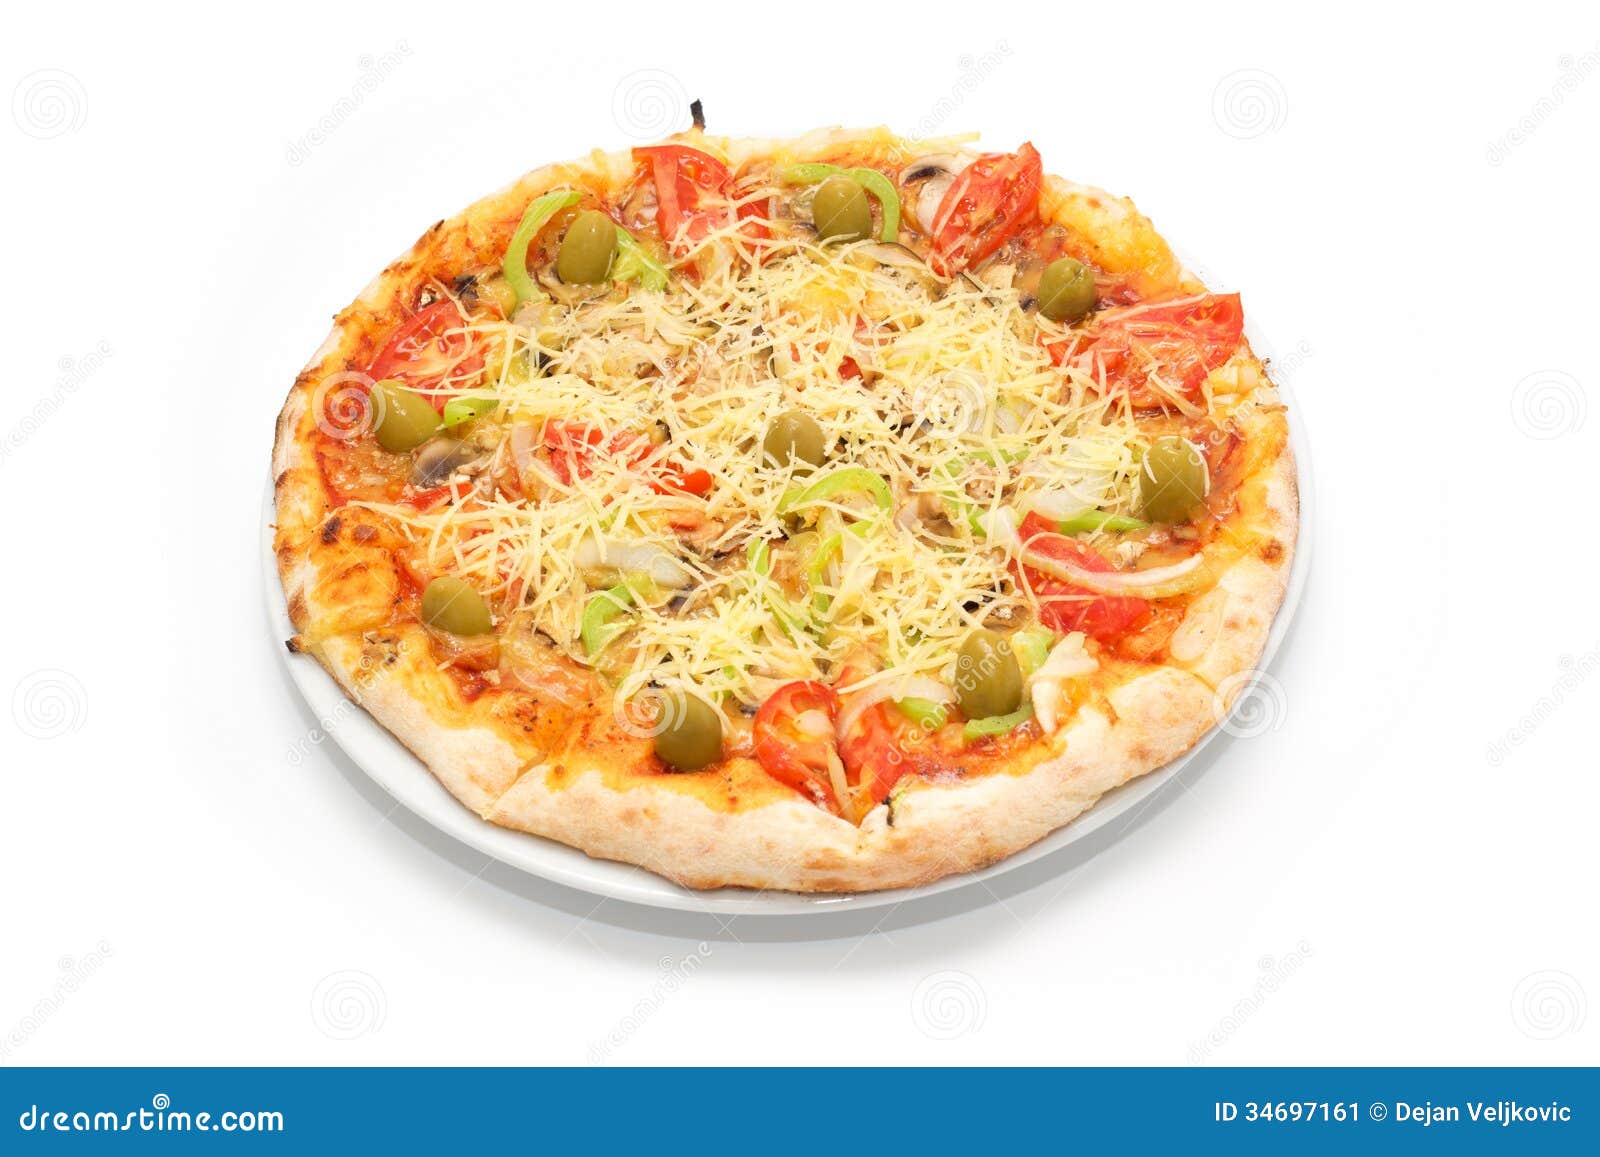 pizza vegetariana on the plate